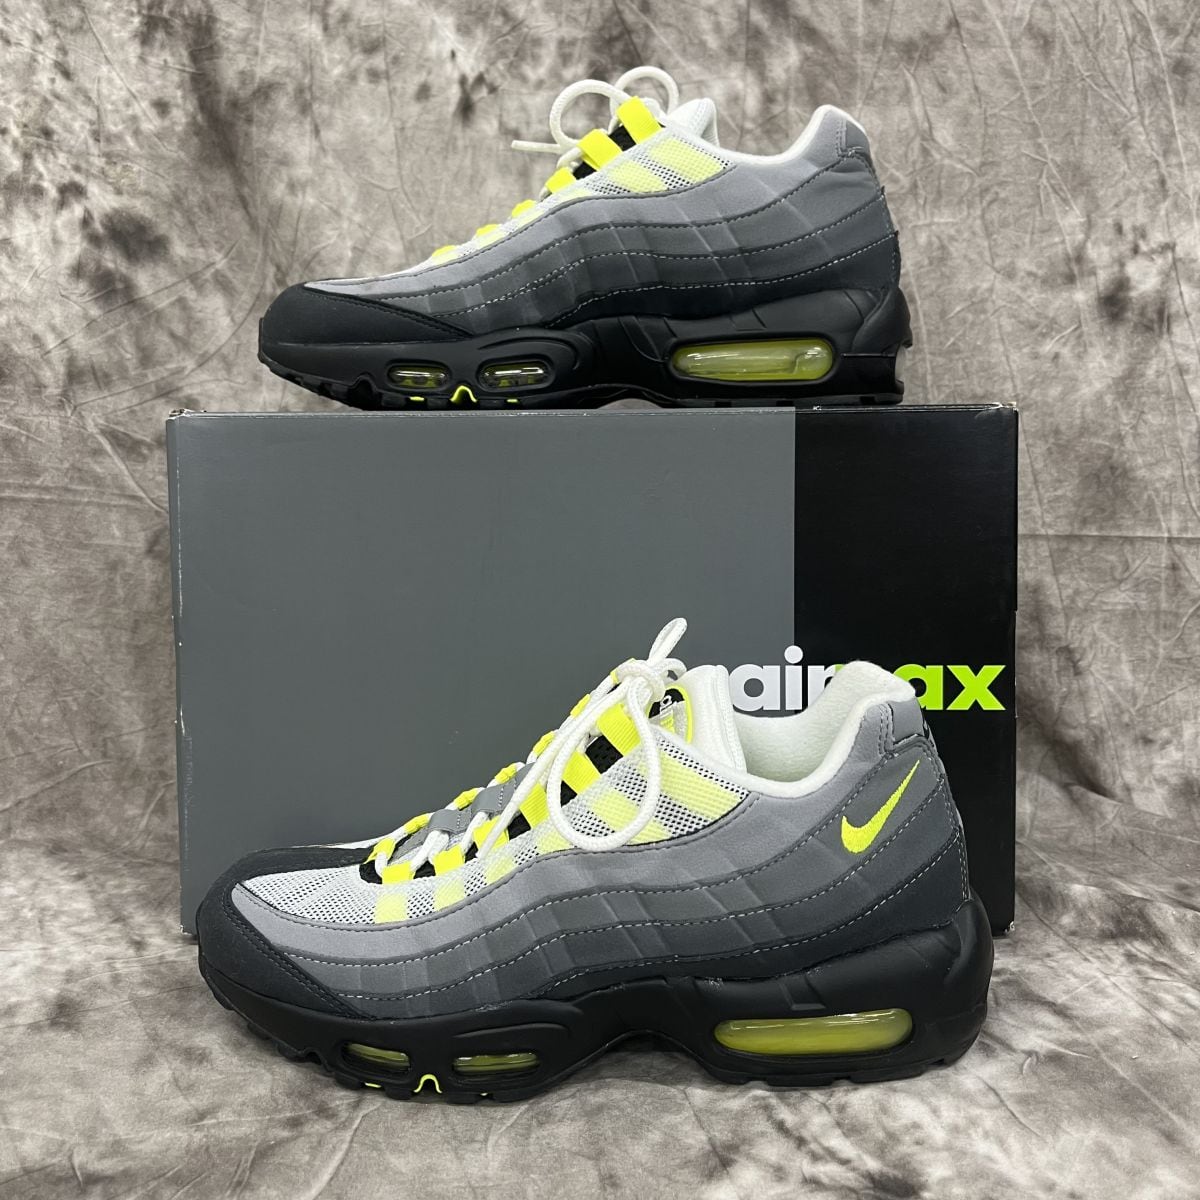 Nike Air Max 95 OG Neon Yellow イエローグラデ 黄